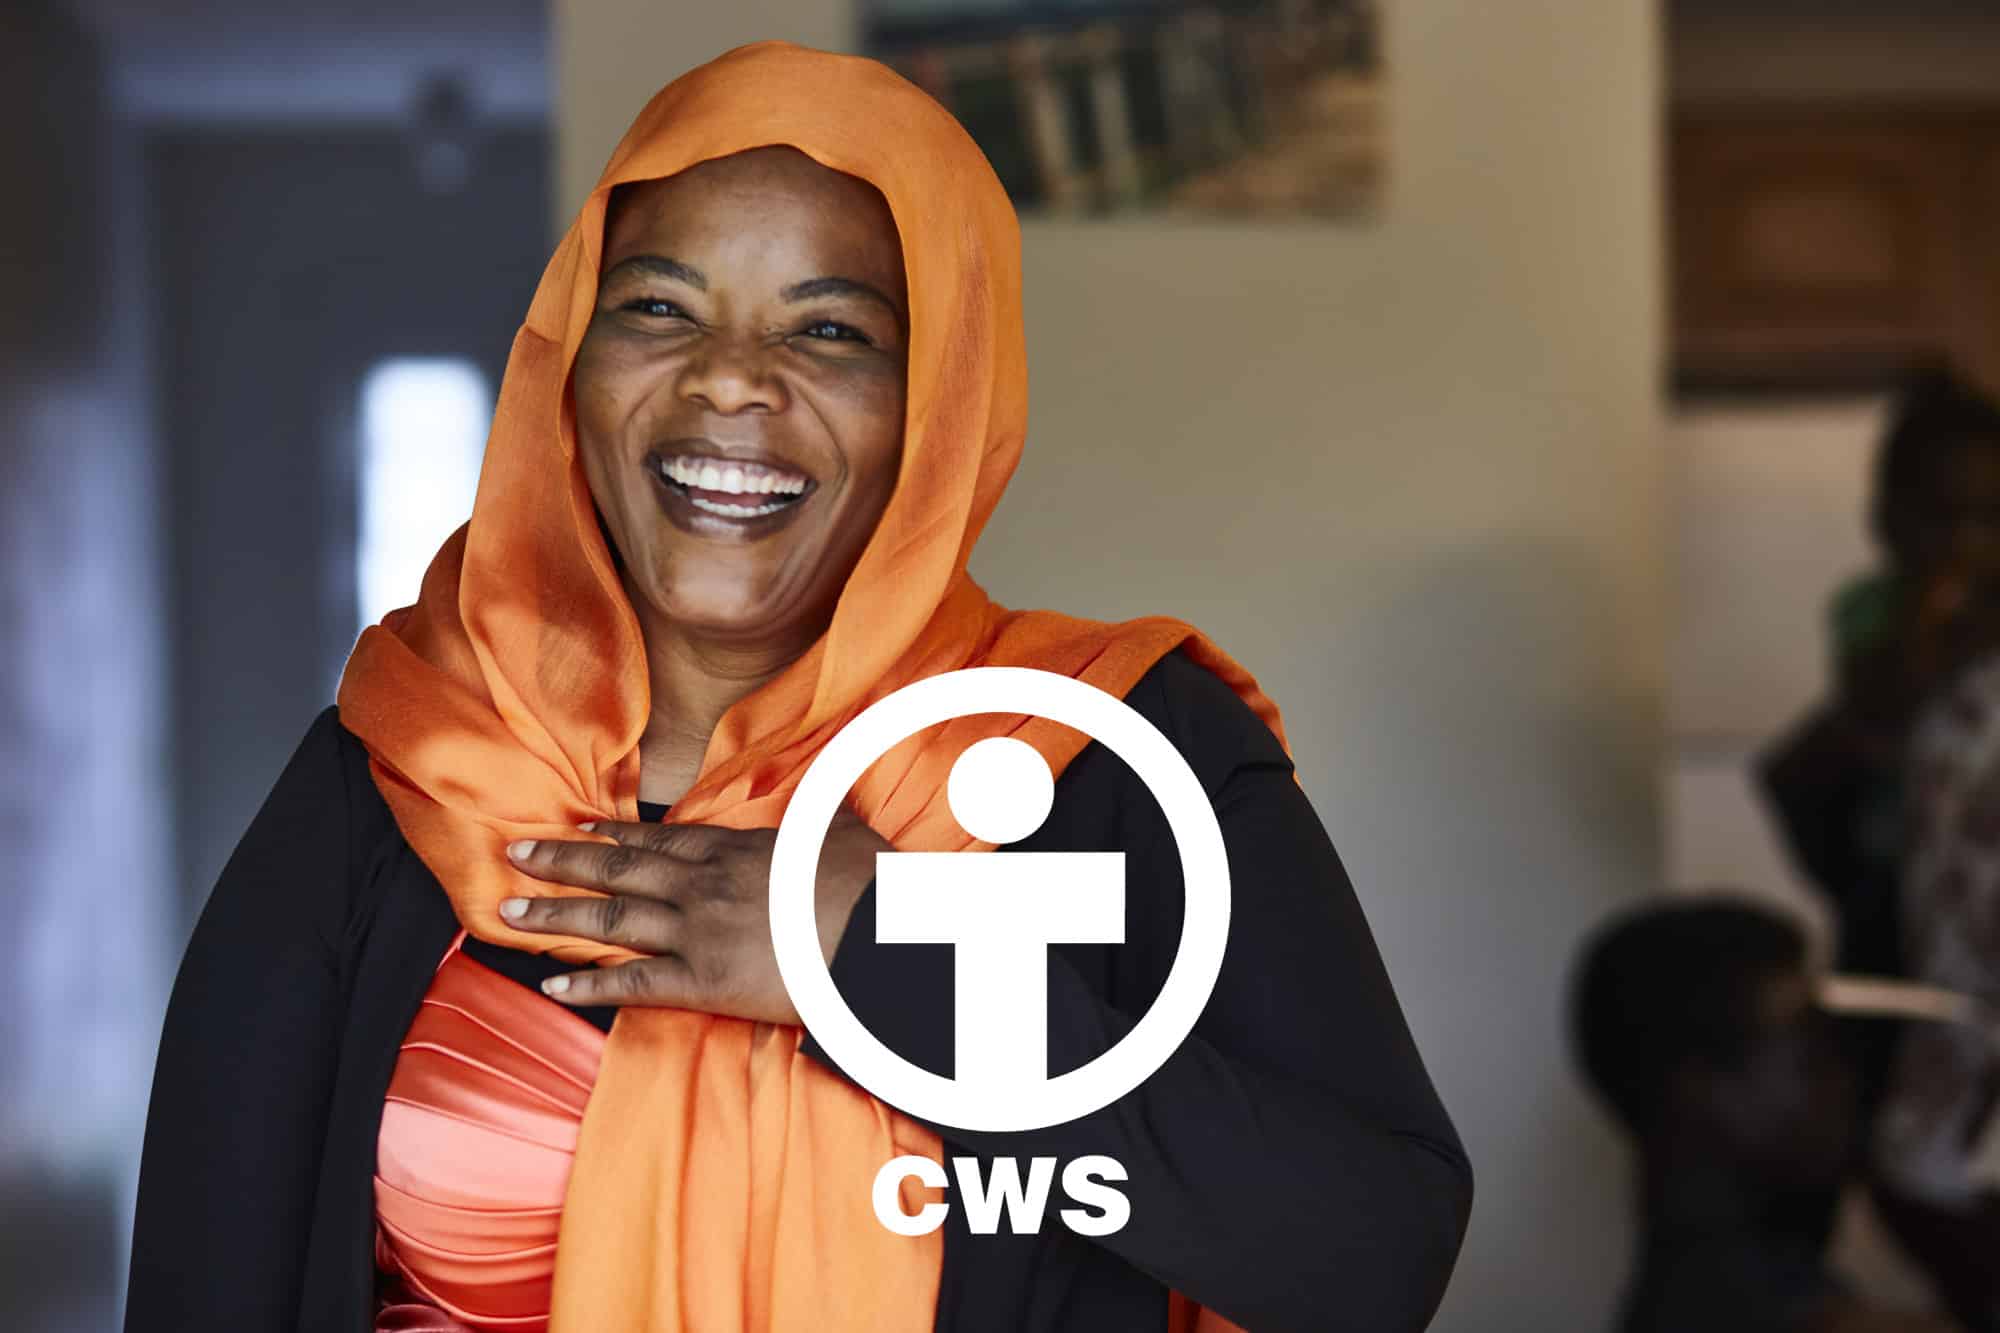 A woman in an orange head scarf smiles at the camera.